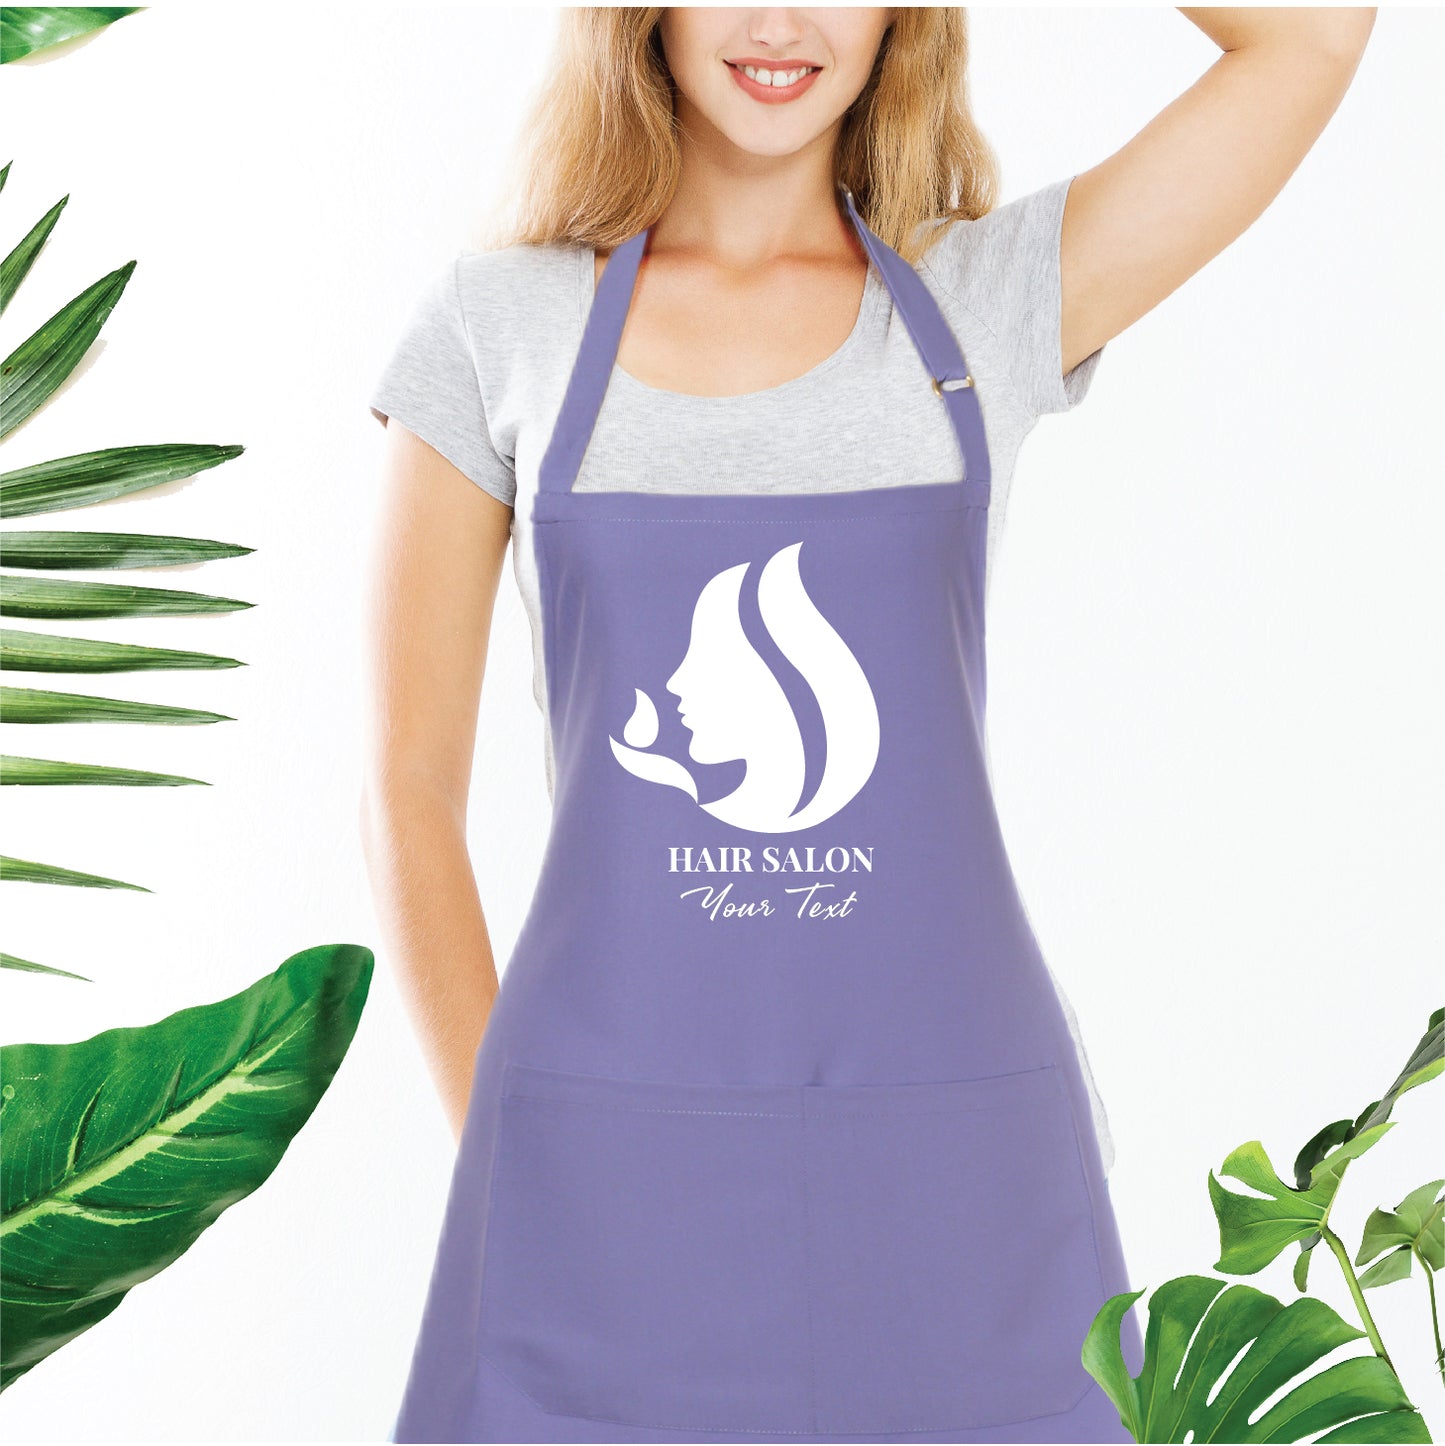 Personalized Apron for Beauty Salon